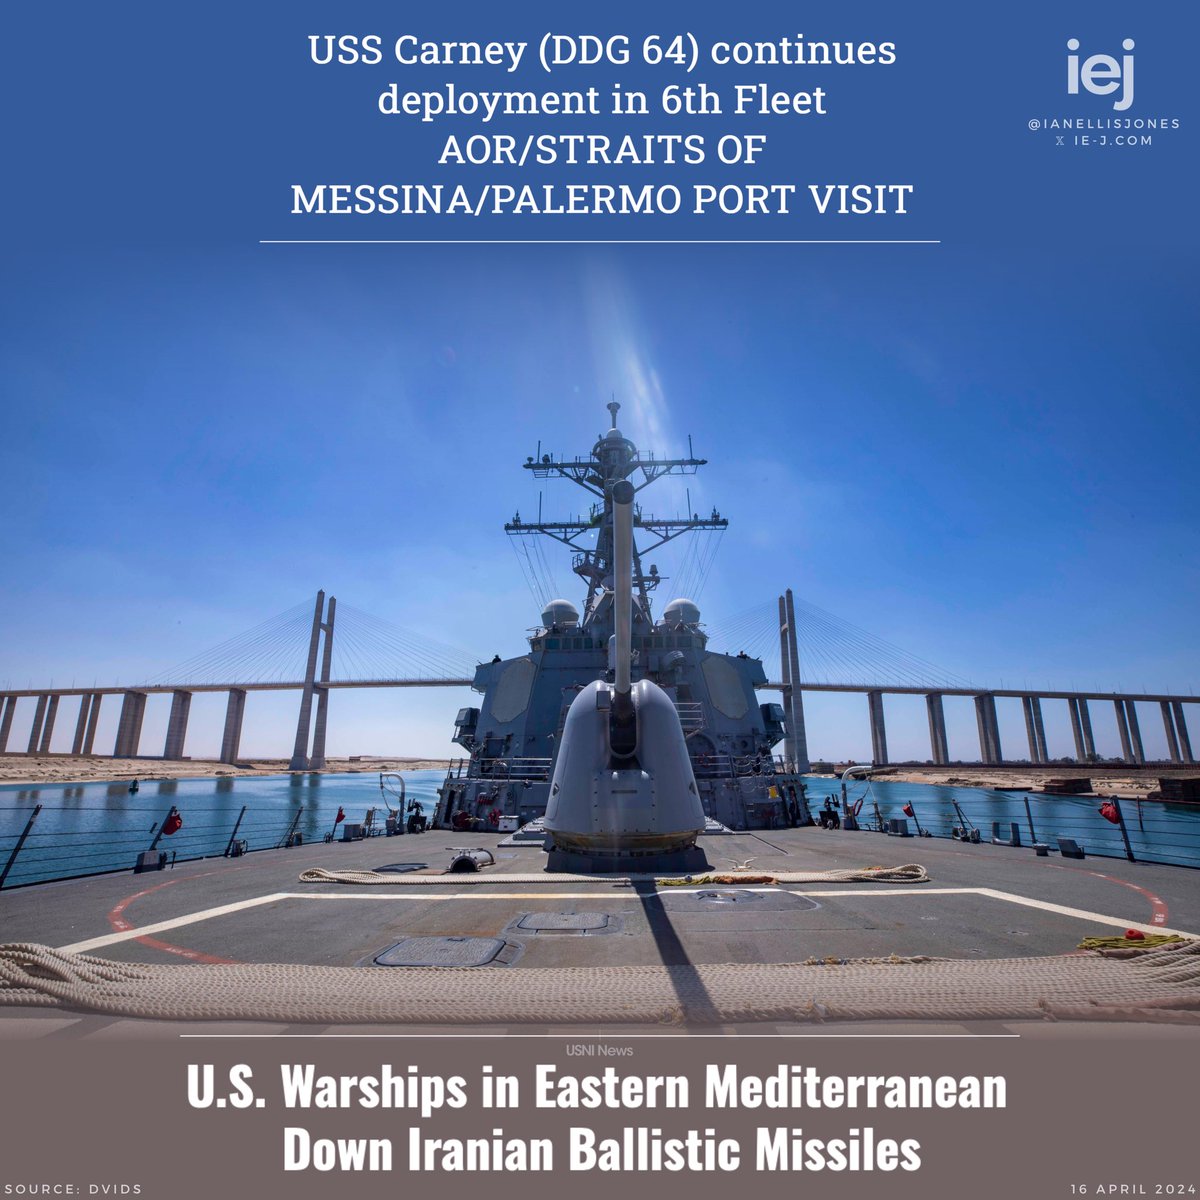 Quite the deployment for USS Carney & Sailors 🇺🇸

Heading home after 5 months in the Red Sea & at a port visit in Palermo, Italy, then had to race back to the eastern Med for the defense of Israel—shooting down Iranian ballistic missiles. Also:

- First to engage Houthi missiles…